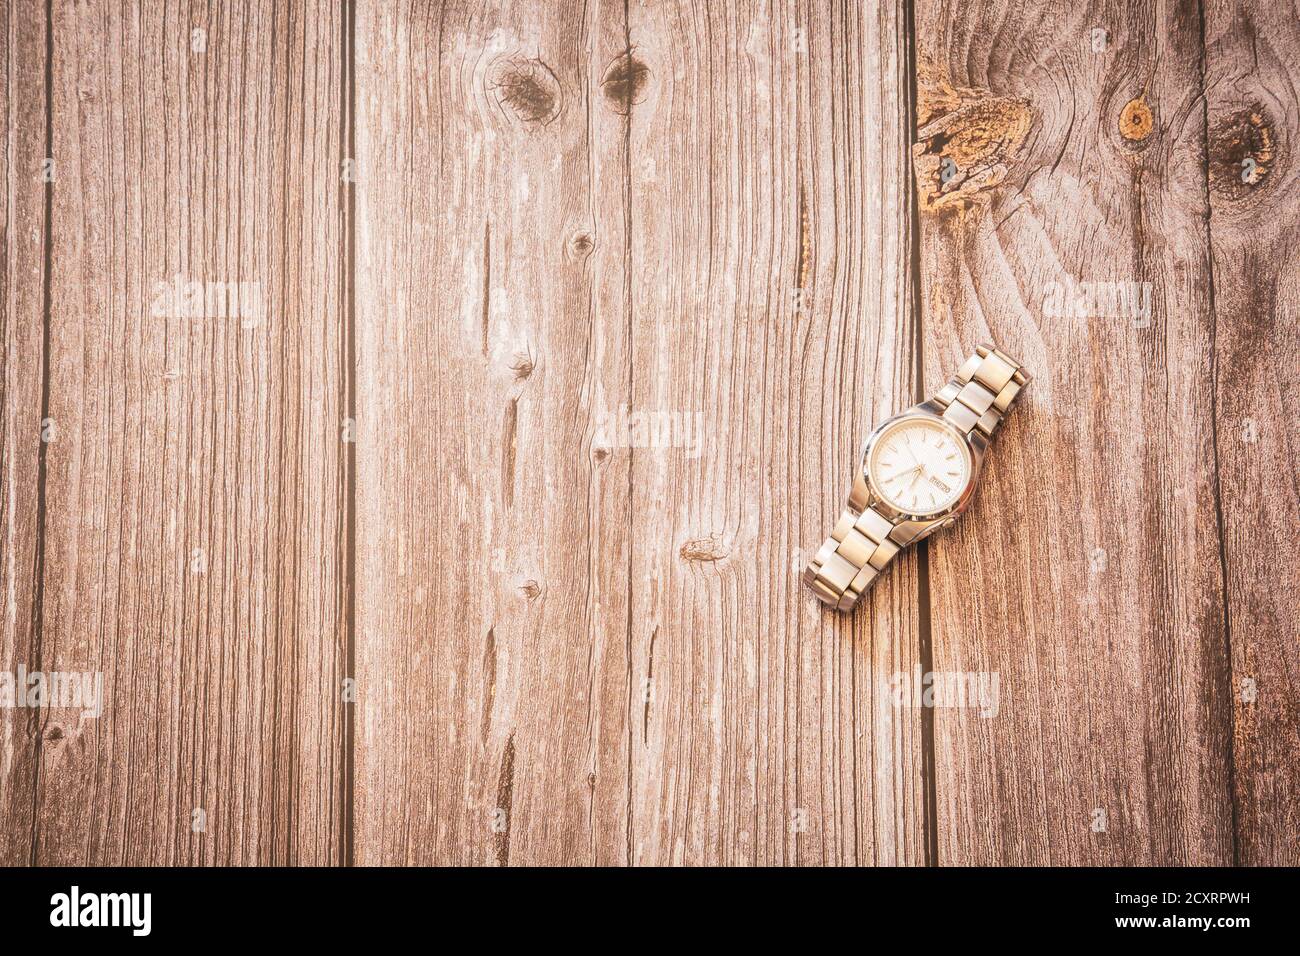 A men's silver wrist watch on a rustic wooden background with copy space Stock Photo